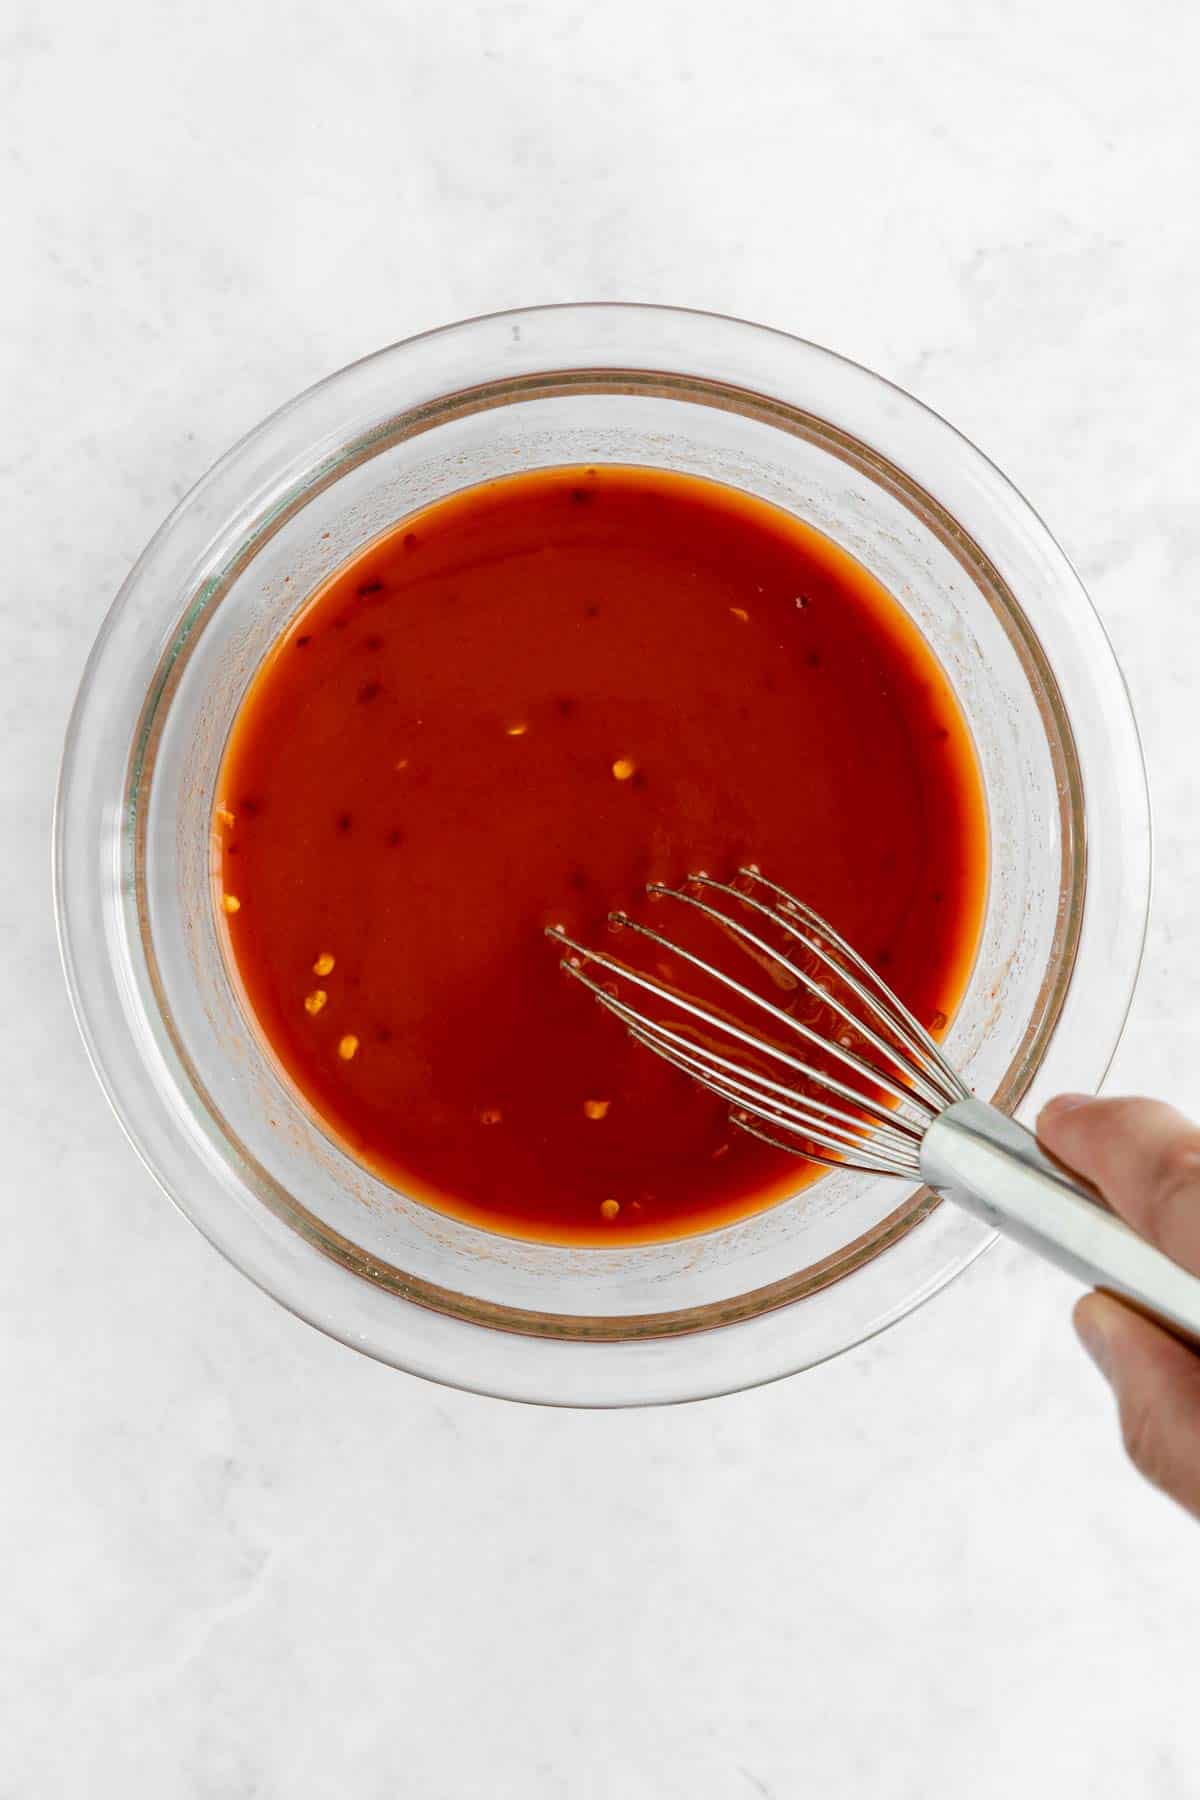 whisking homemade sweet and sour sauce in a bowl